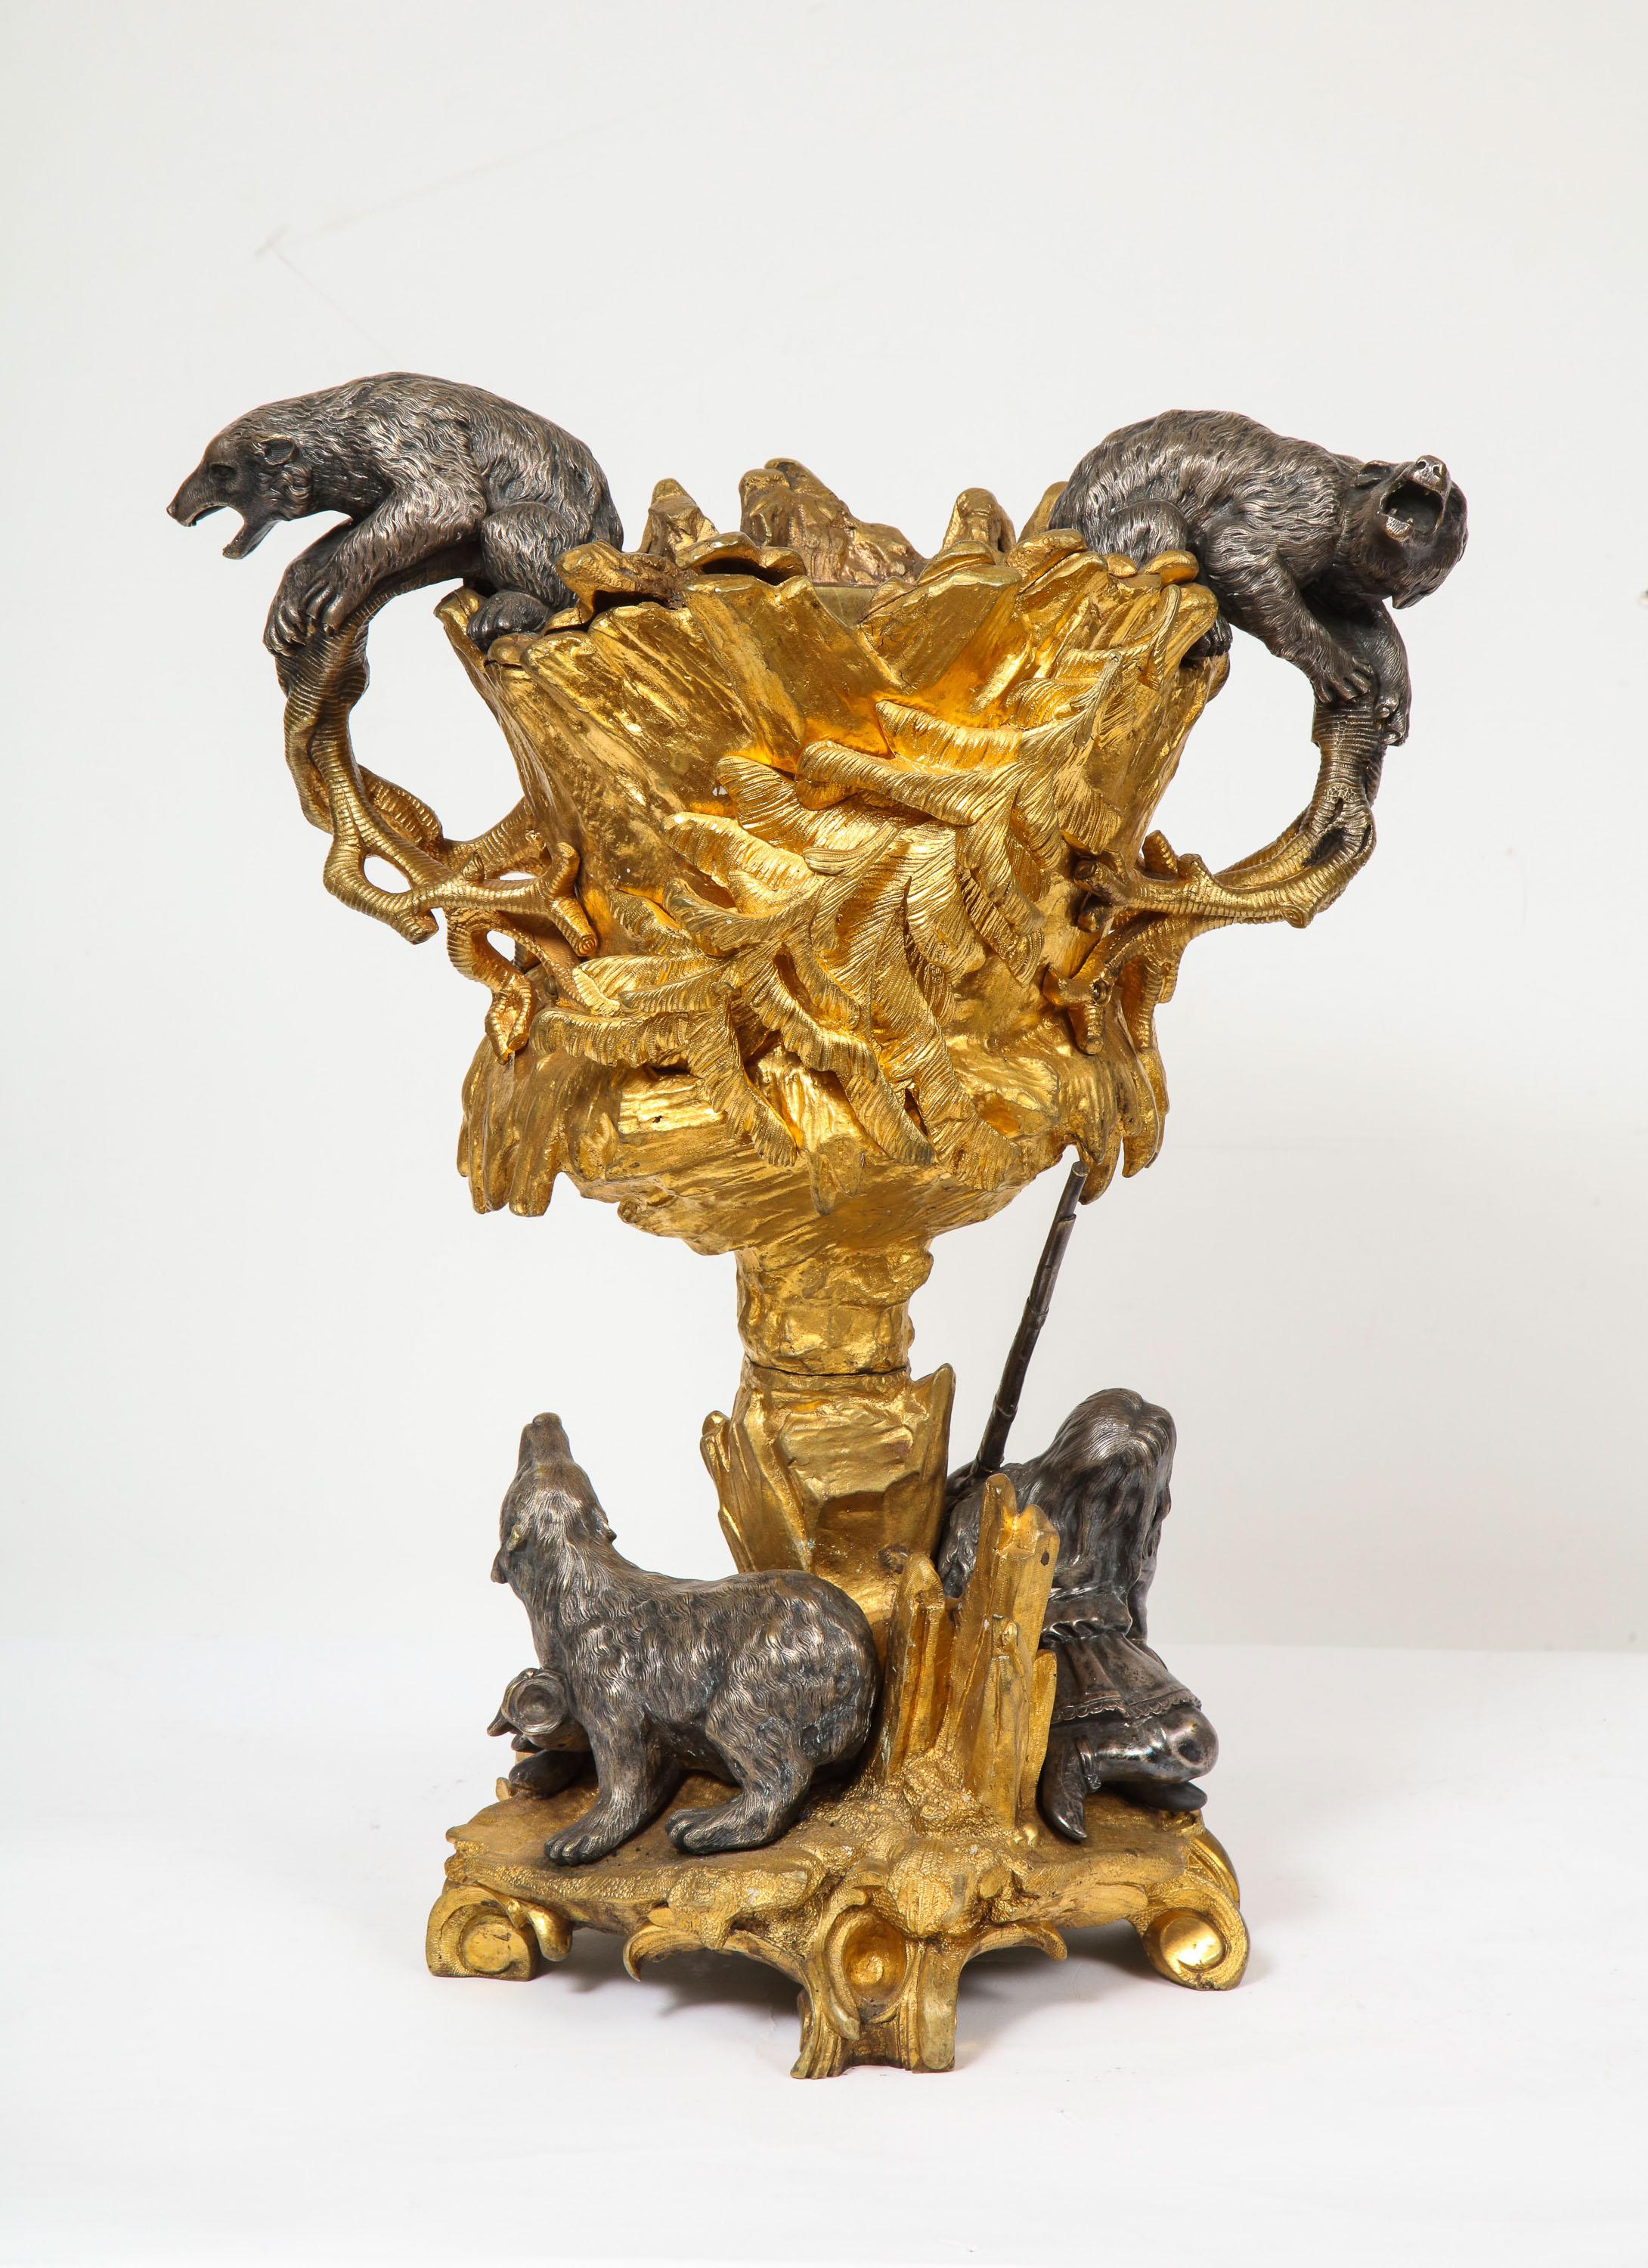 Important ormolu and silvered bronze figural wine cooler, possibly Russian, 1860

Gilt and silvered bronze wine cooler. Modeled with two Russian polar bears at the handles and with a young gunmen holding a rifle seated with a sea otter.

Very